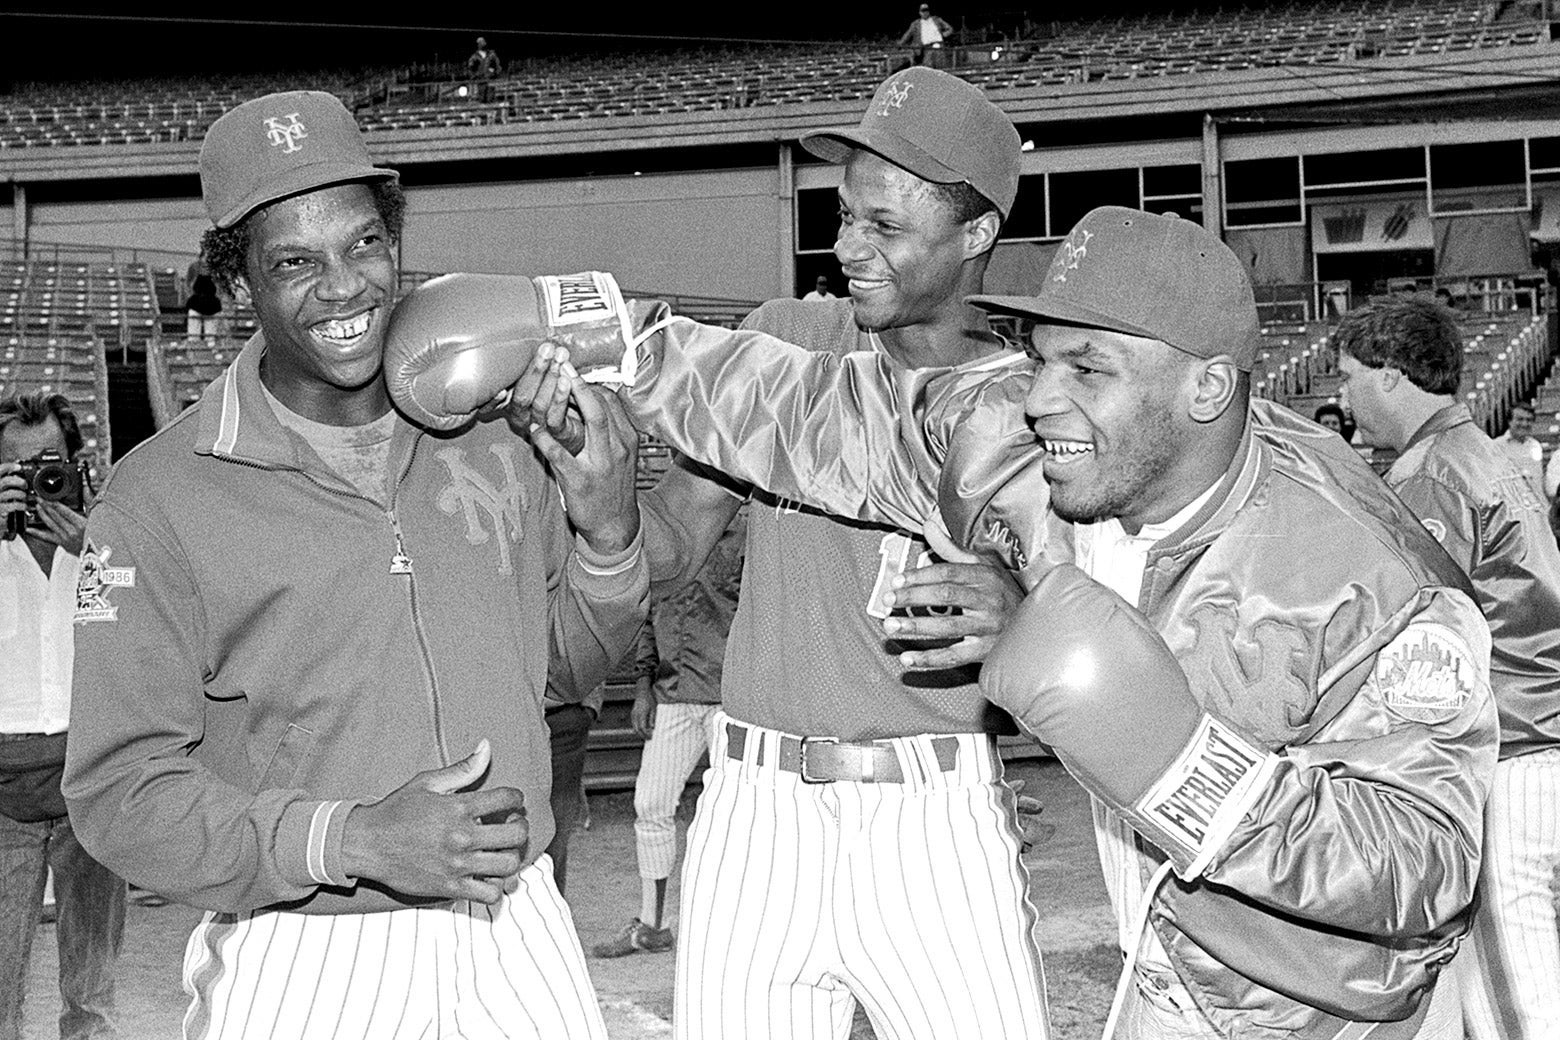 Mike Tyson shows Dwight Gooden how he does it by landing a long right to the amusement of Darryl Strawberry (center) at Shea Stadium prior to the game against the Expos on Sep. 9, 1986.